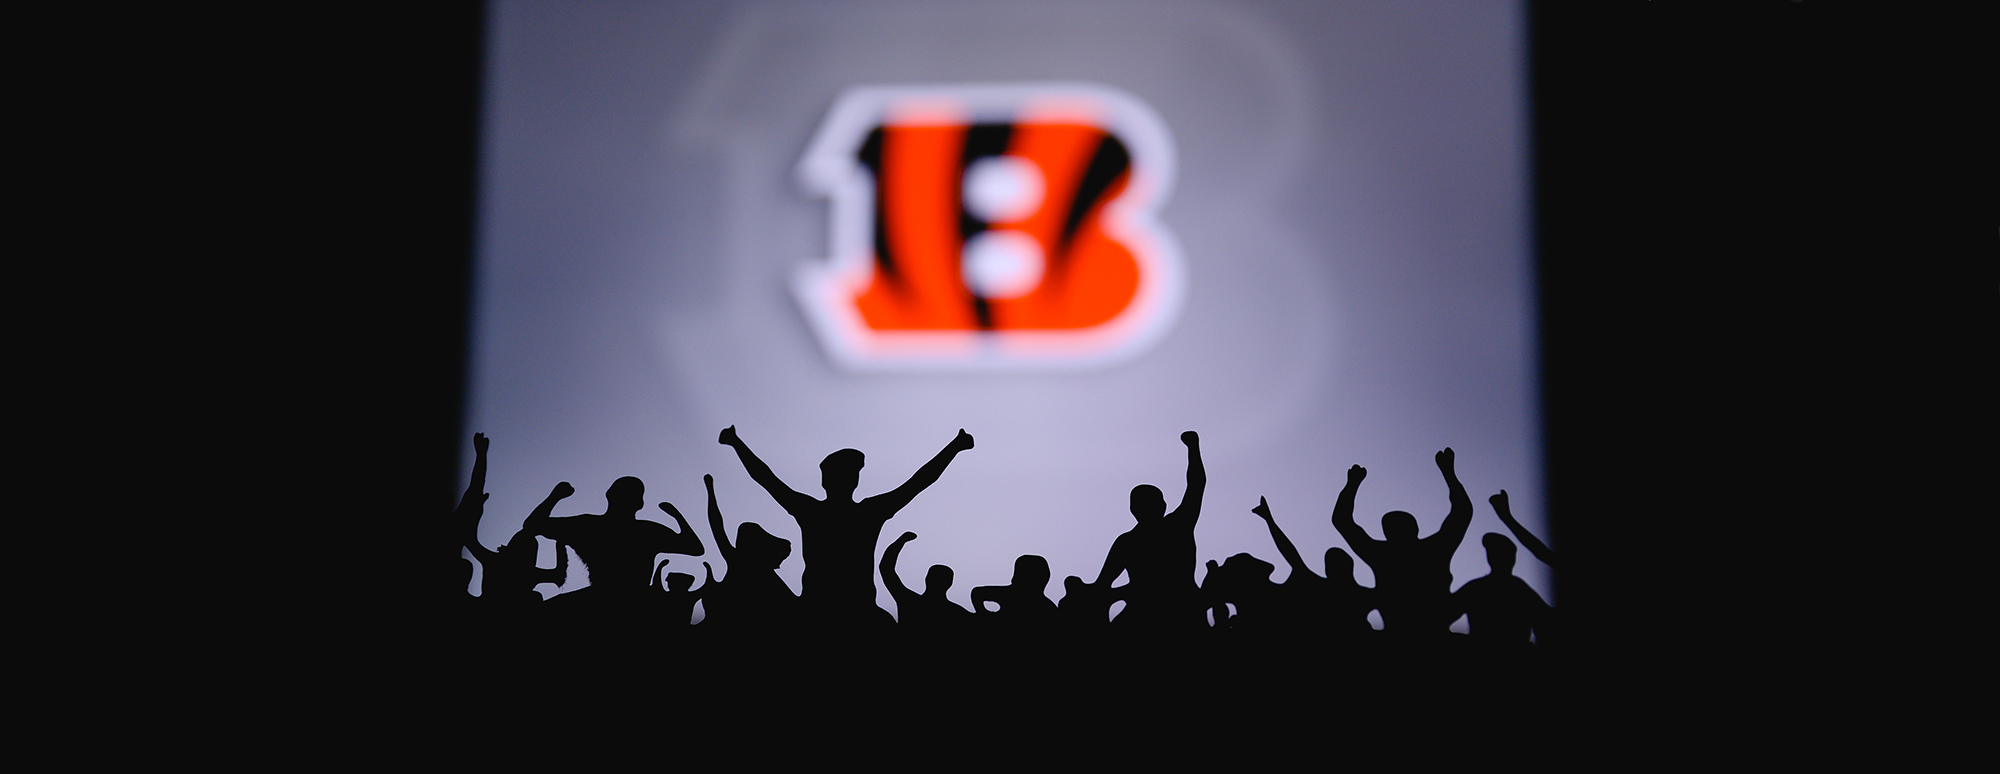 Can the Cincinnati Bengals edge out the Rams in this year's Super Bowl?